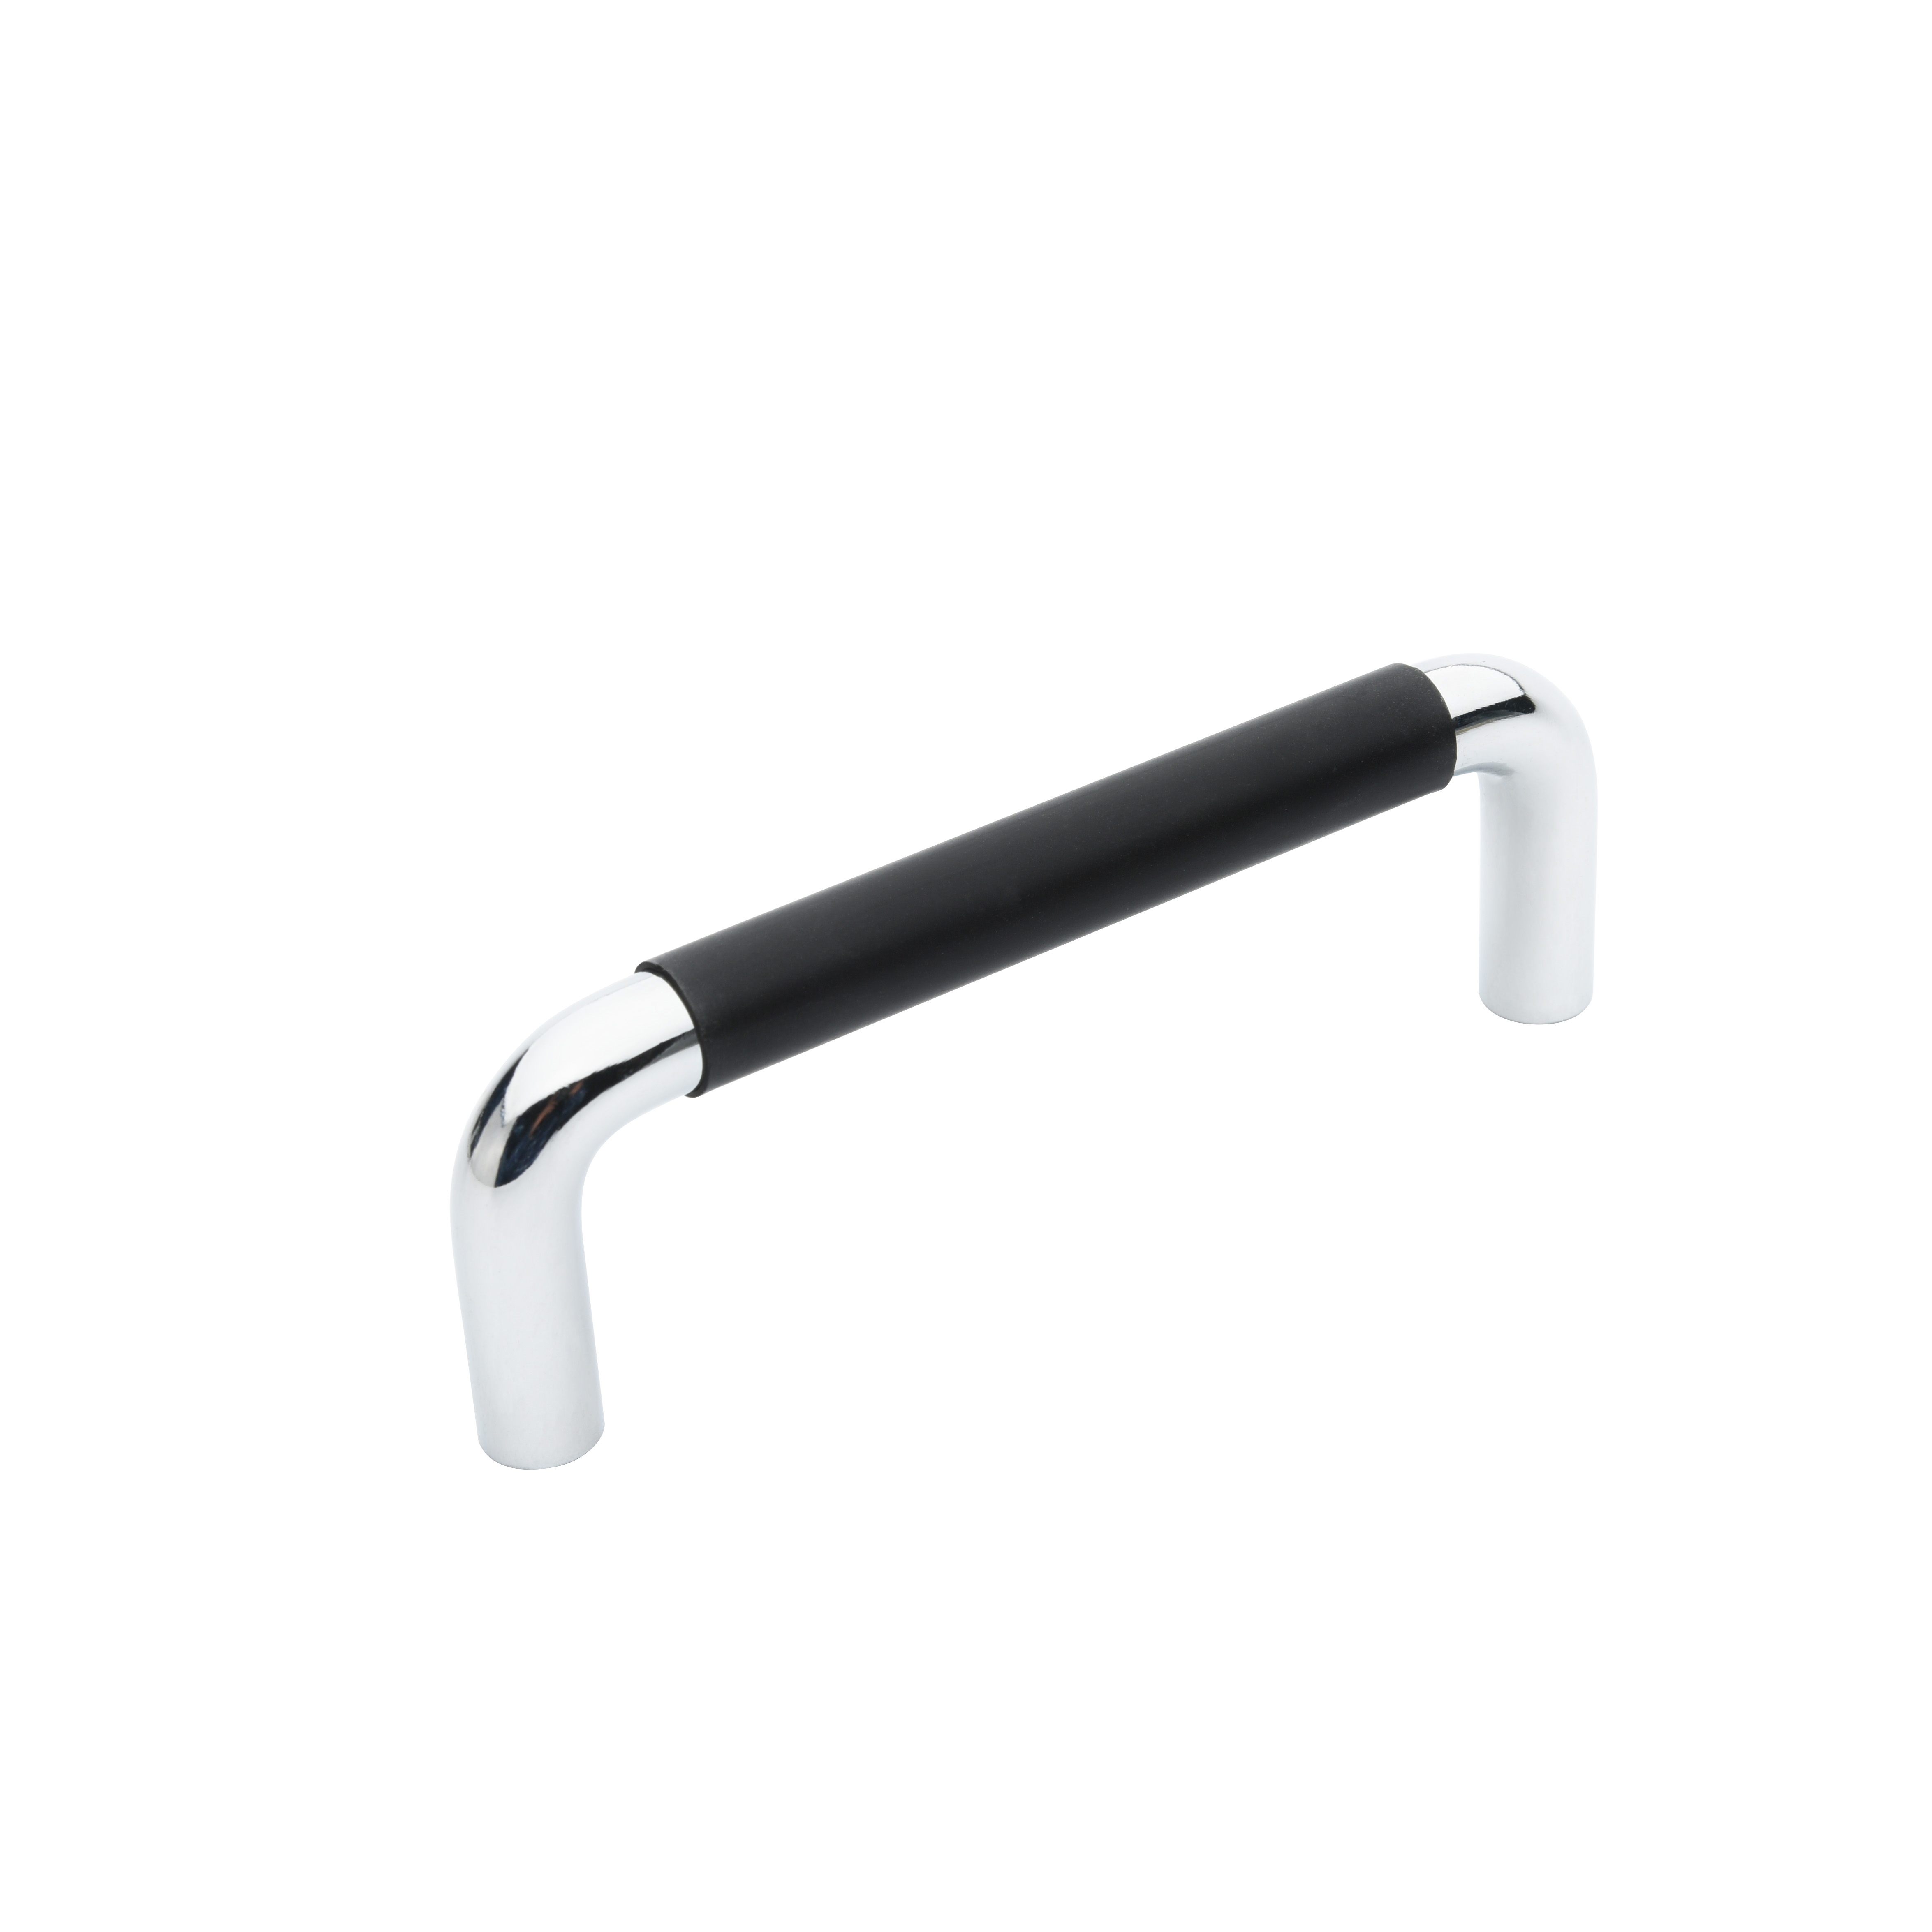 Handles Round Bar With Rubber